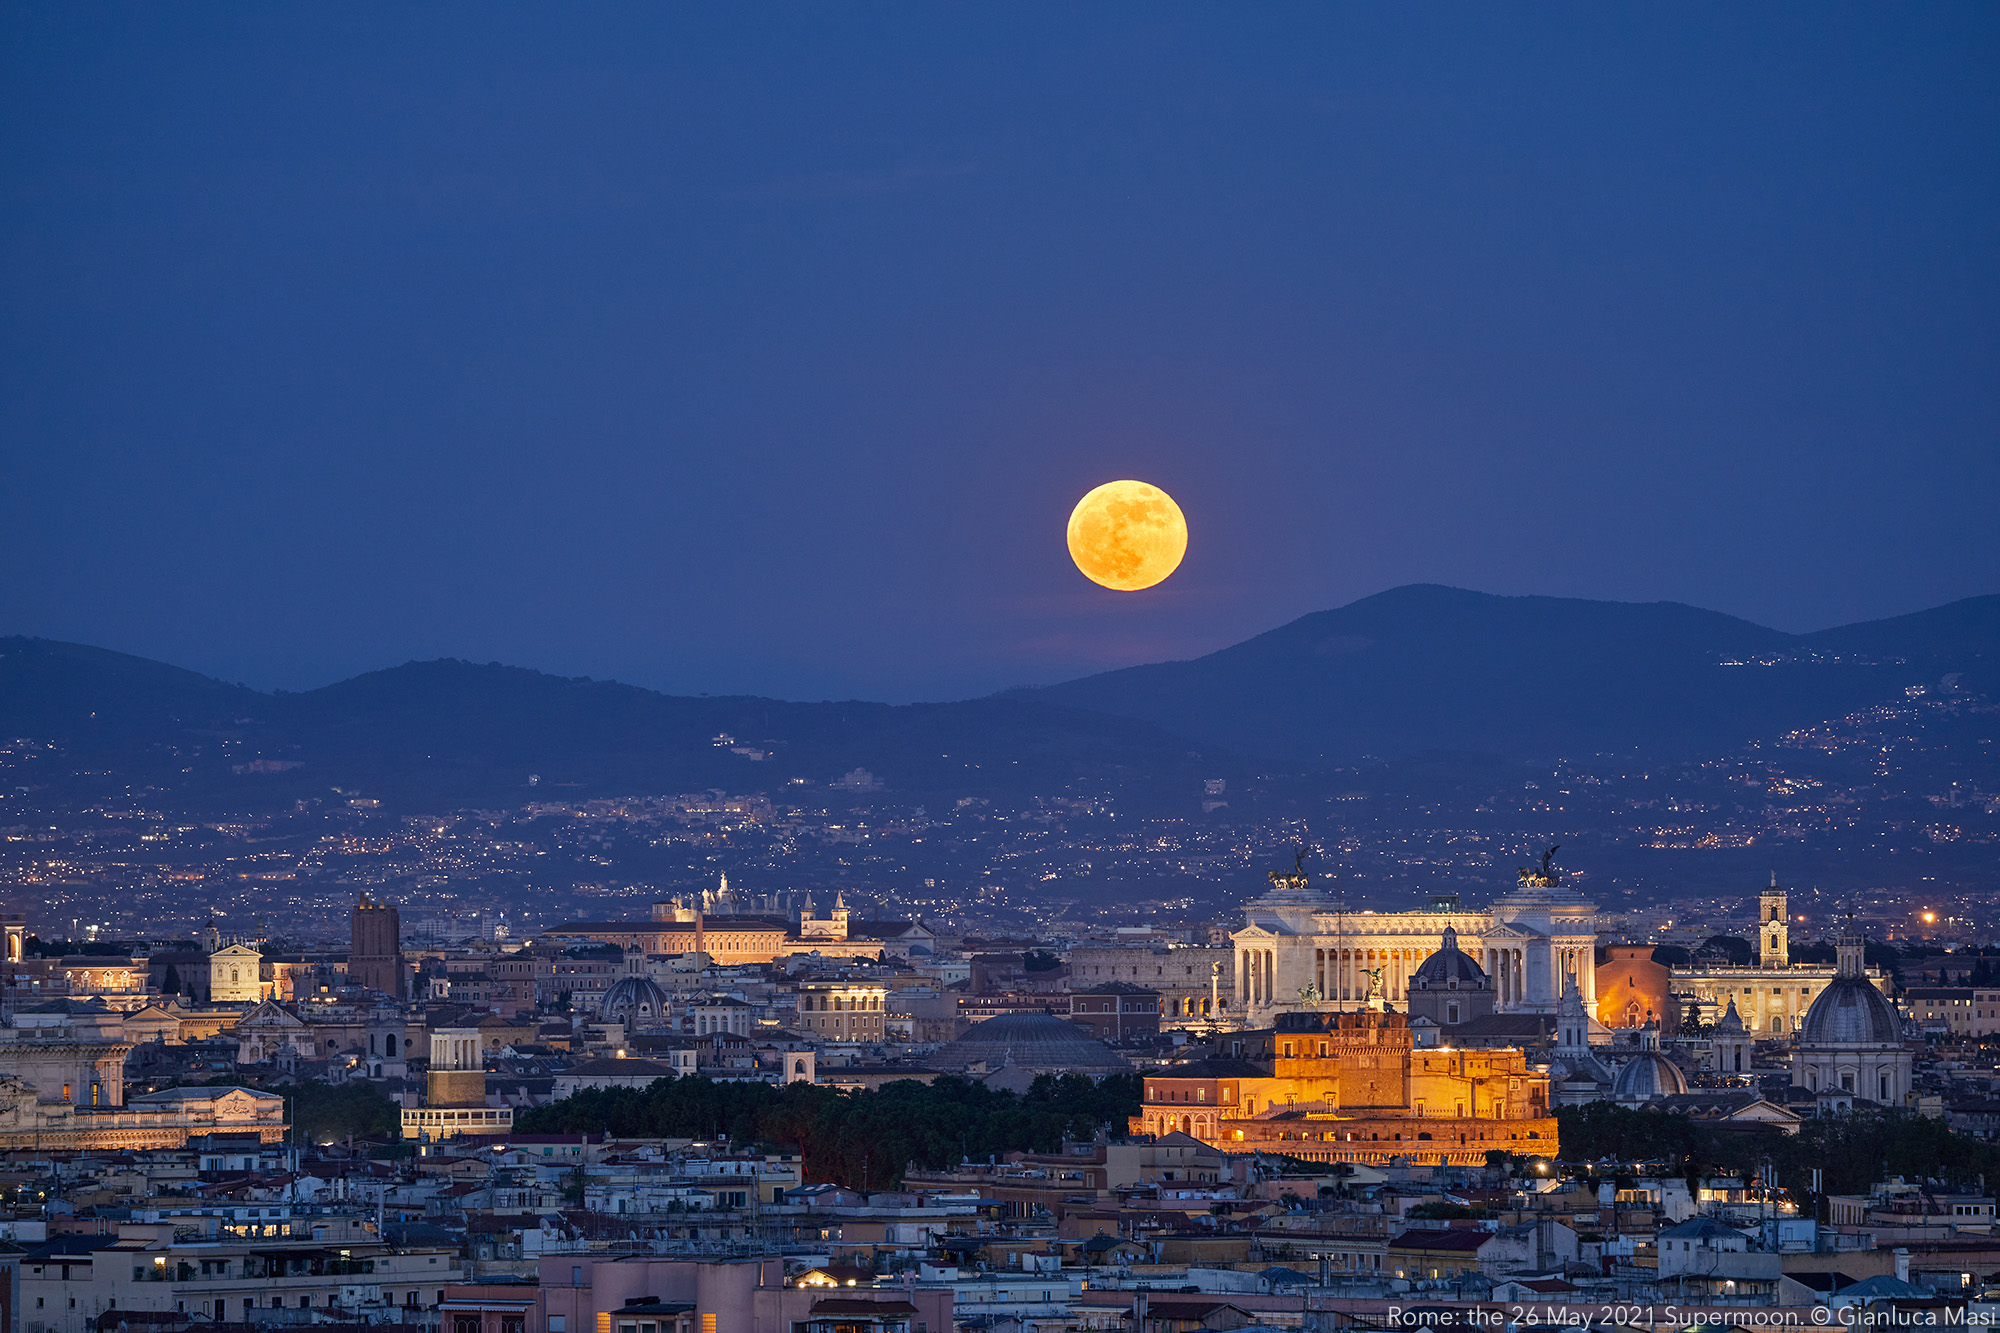 A wider view on Rome and the Supermoon. 26 May 2021.